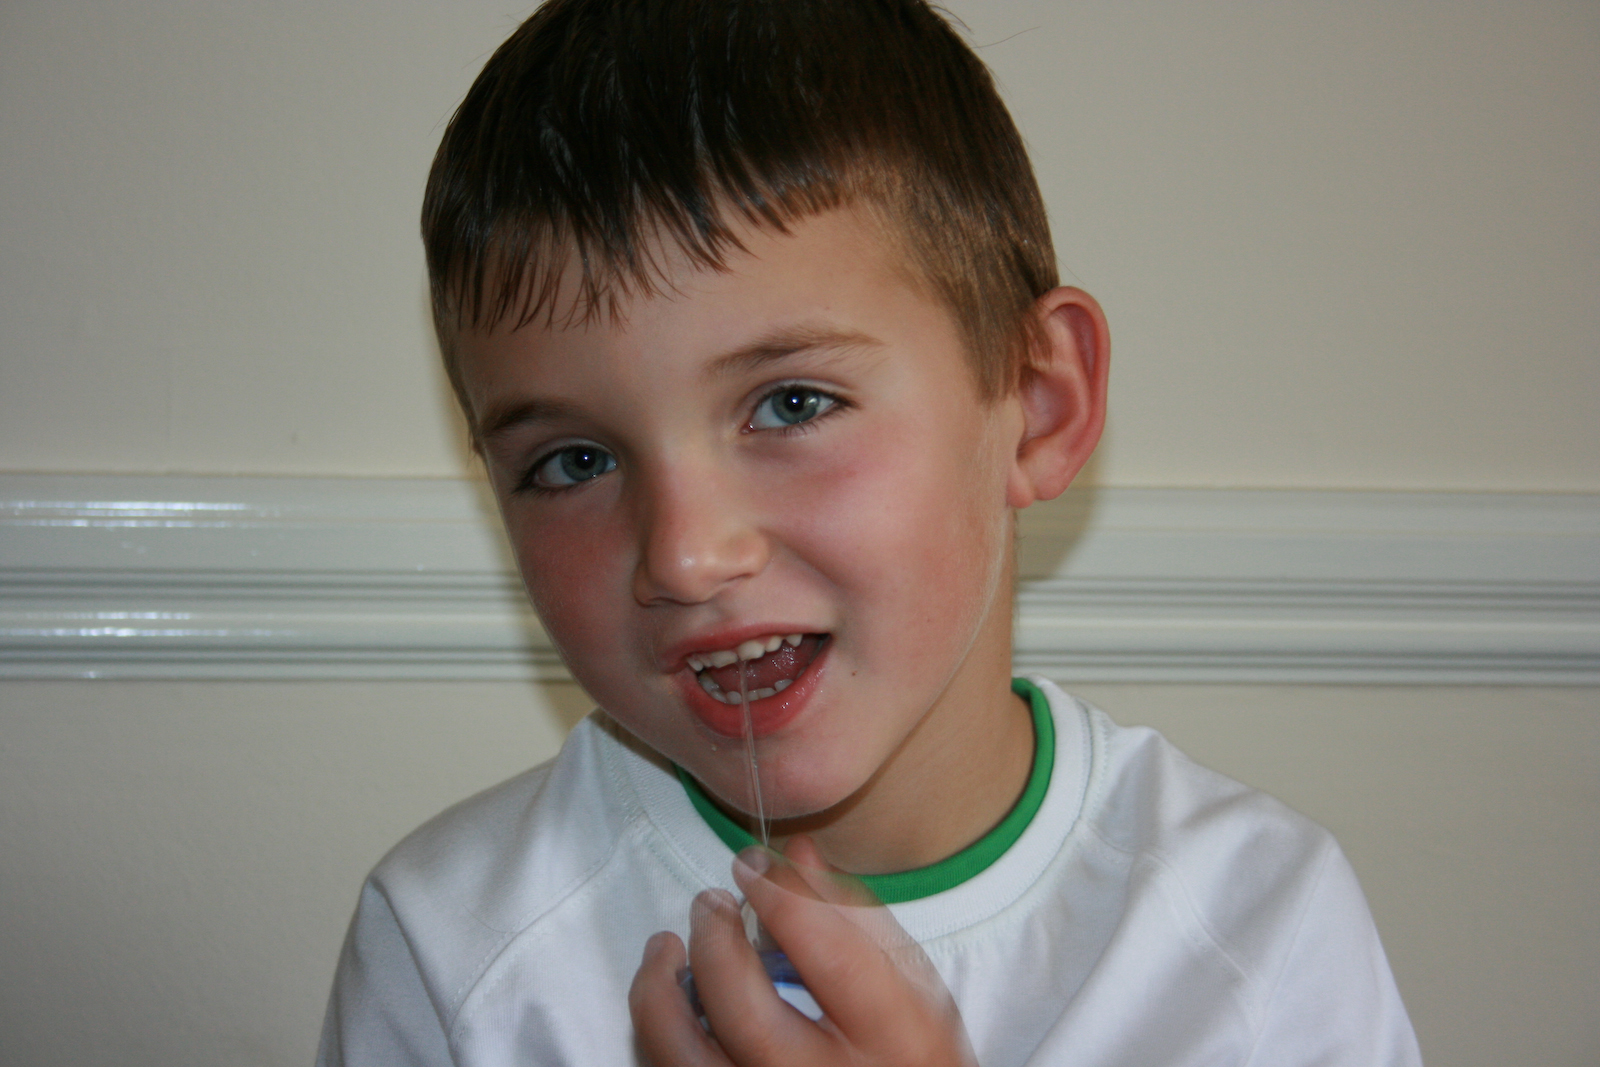 a boy with toothbrush in his mouth is standing